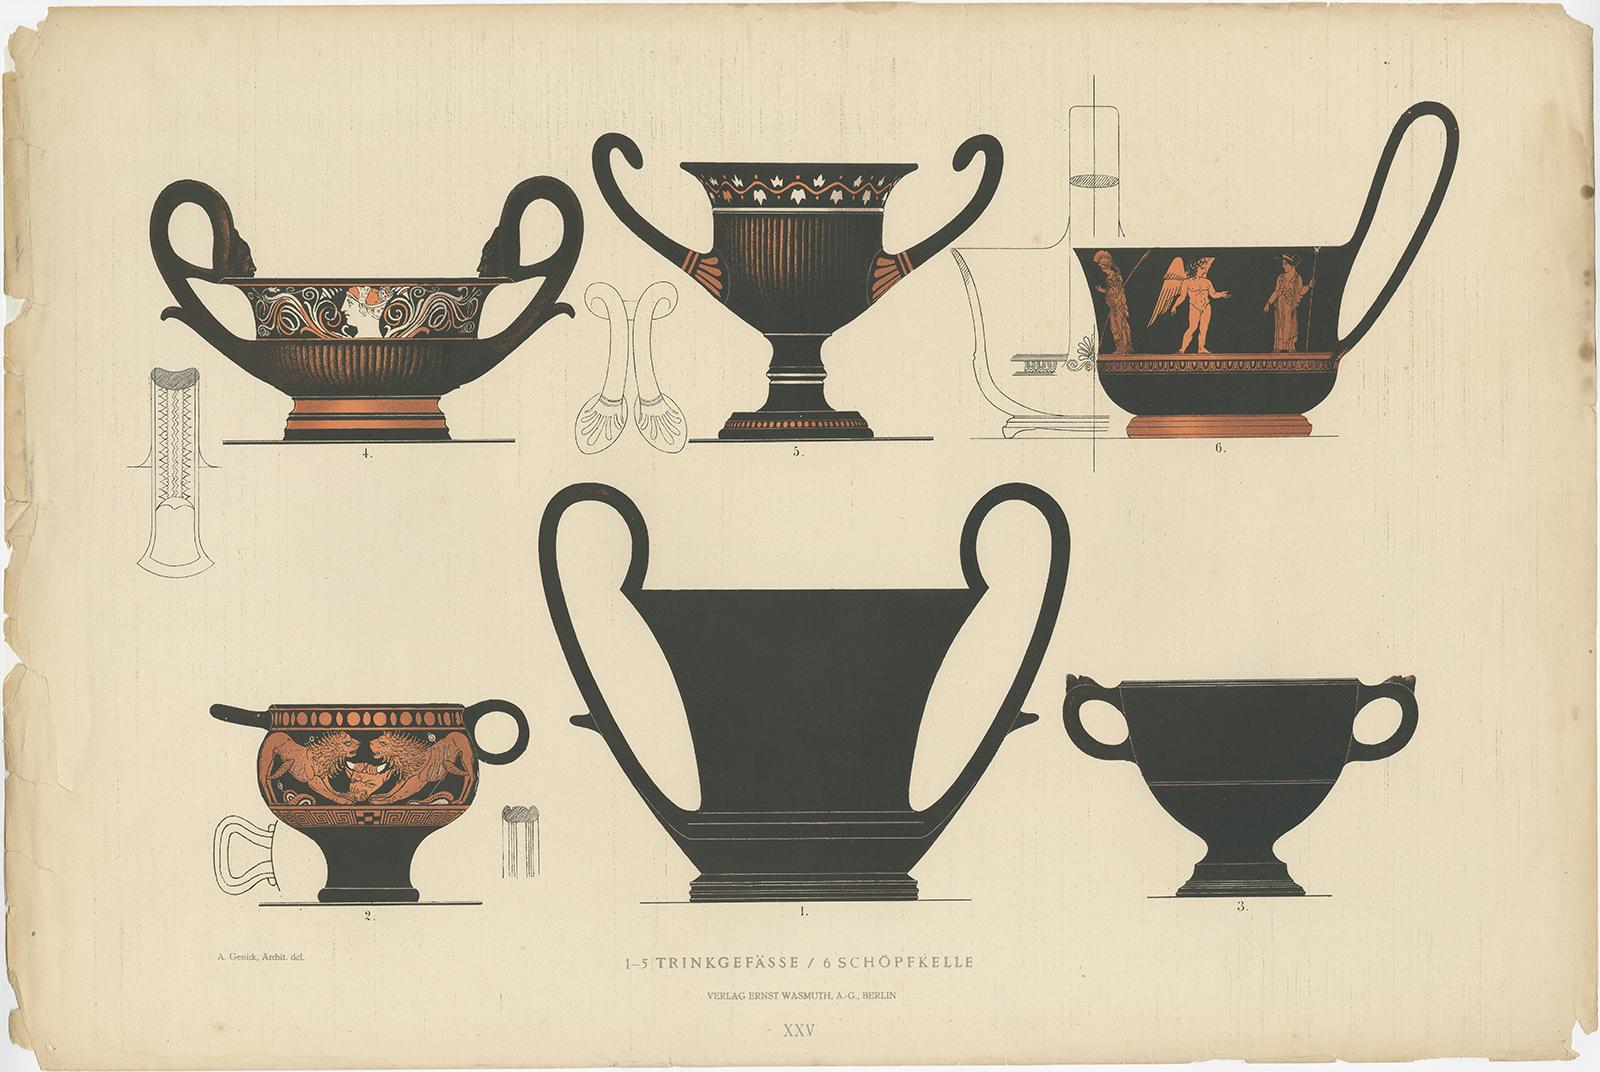 Antique print titled 'Kantharos'. Color-printed large lithograph by Ernst Wasmuth depicting Greek drinking vessels and Greek Kyathos (ladle). This print originates from 'Griechische Keramik' by A. Genick. Albert Genick, an architect by training, was